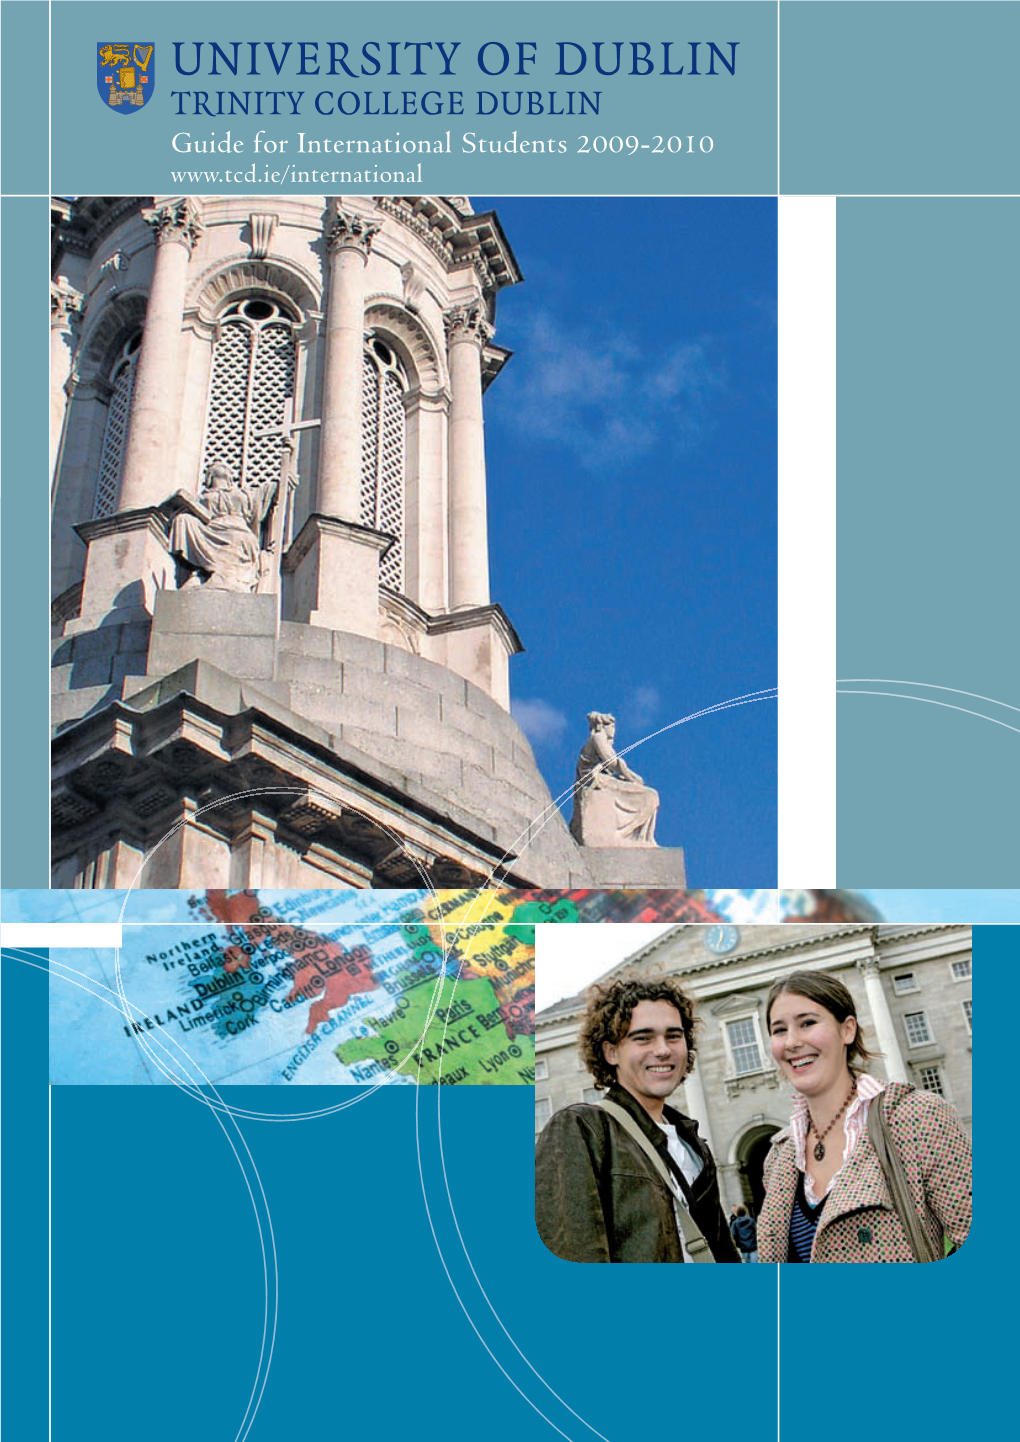 UNIVERSITY of DUBLIN TRINITY COLLEGE DUBLIN Guide for International Students 2009-2010 Welcome from the Provost